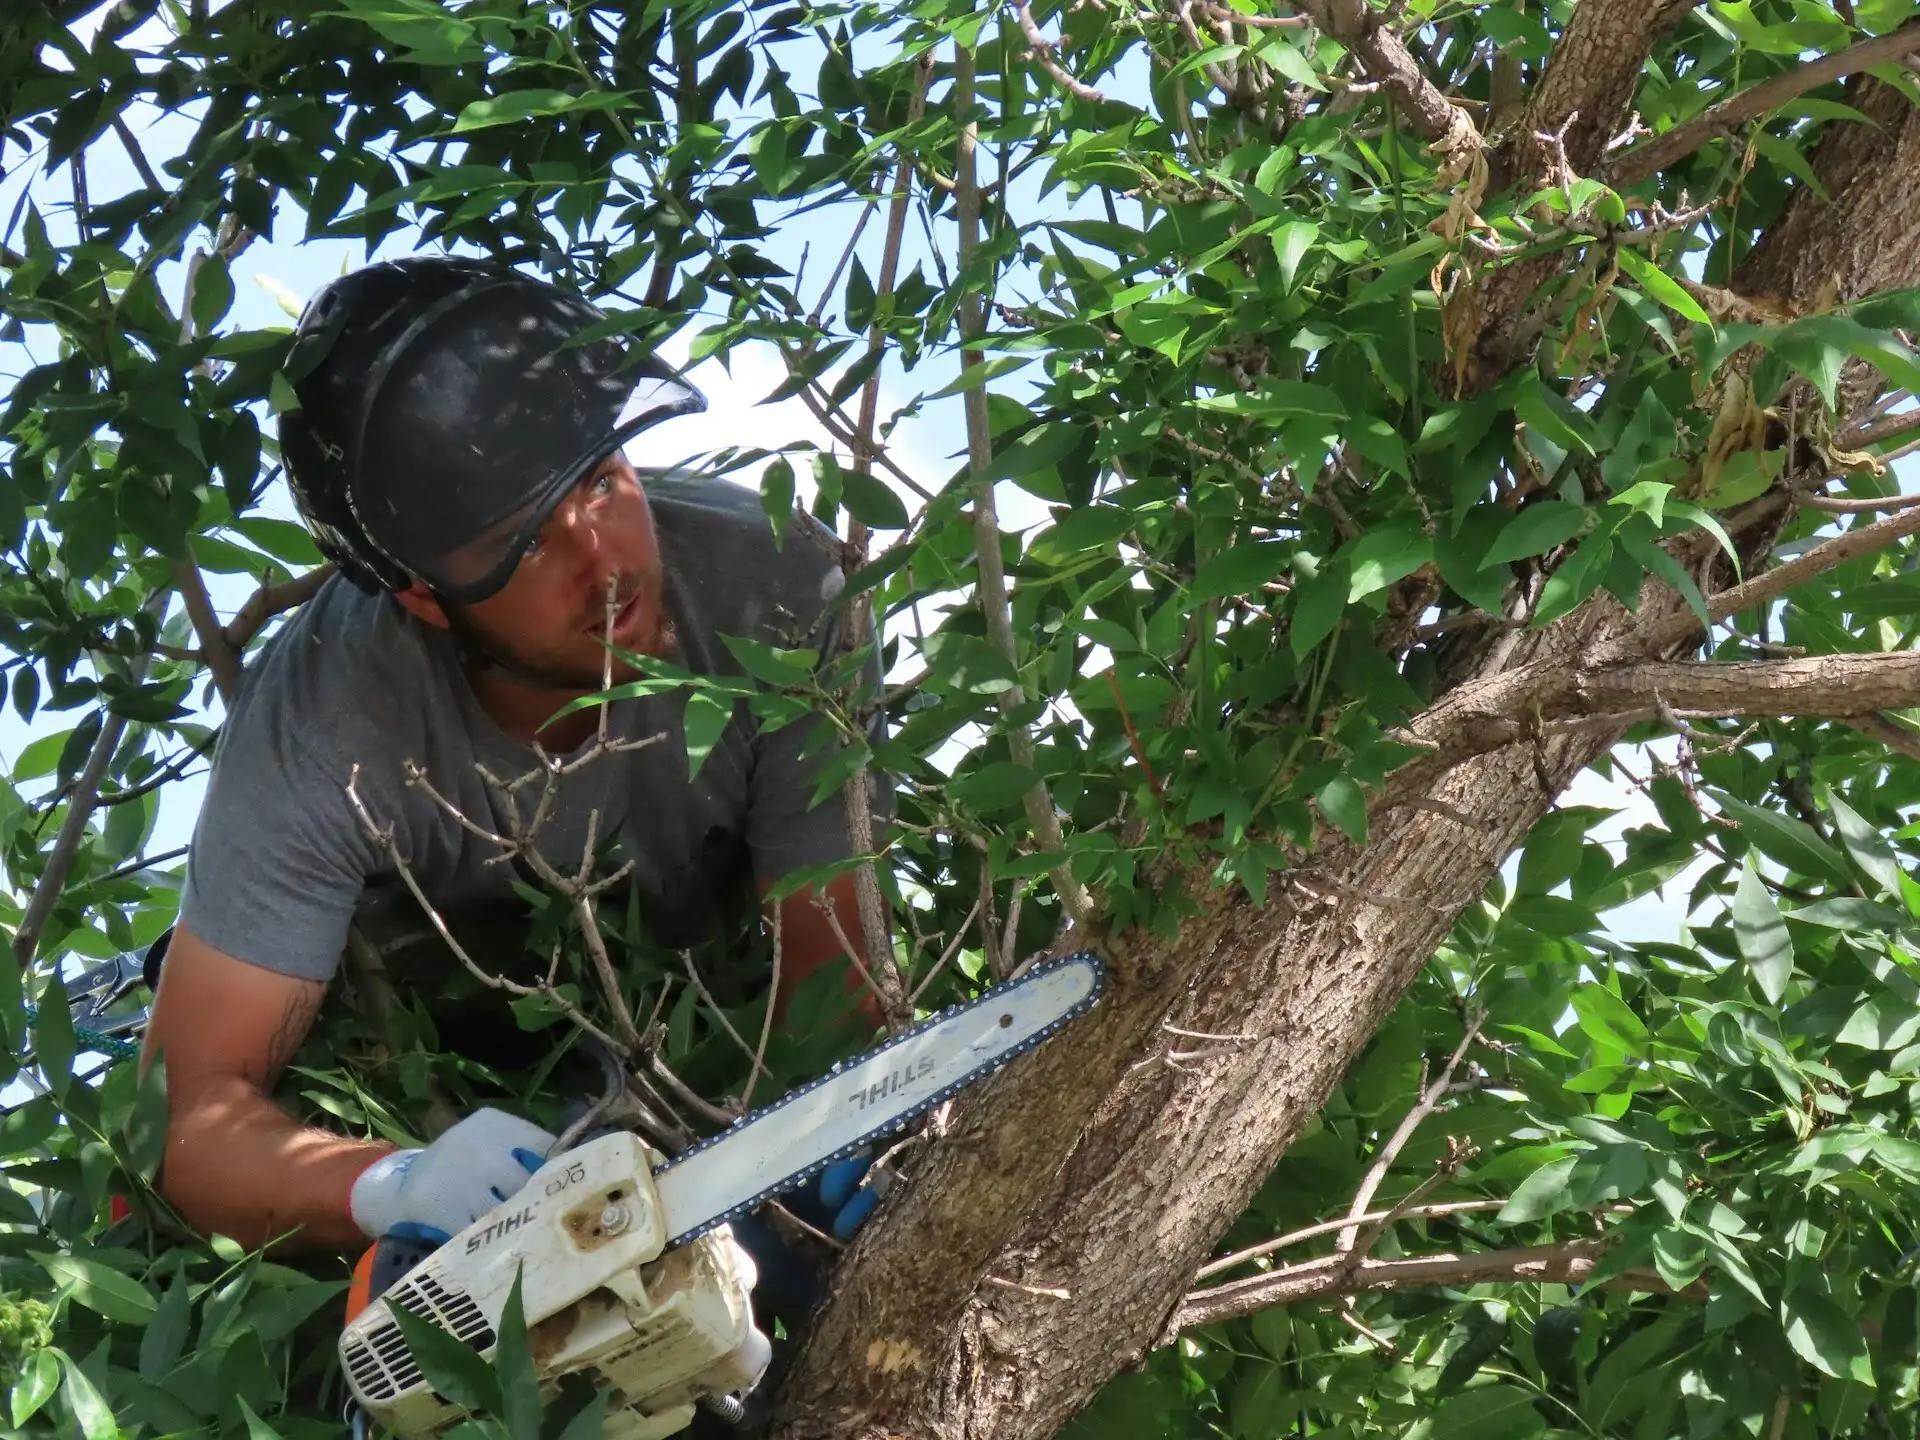 Tree pruning West Goshen. From tree trimming to large tree removal with our professional tree removal equipment, your tree health is on us.